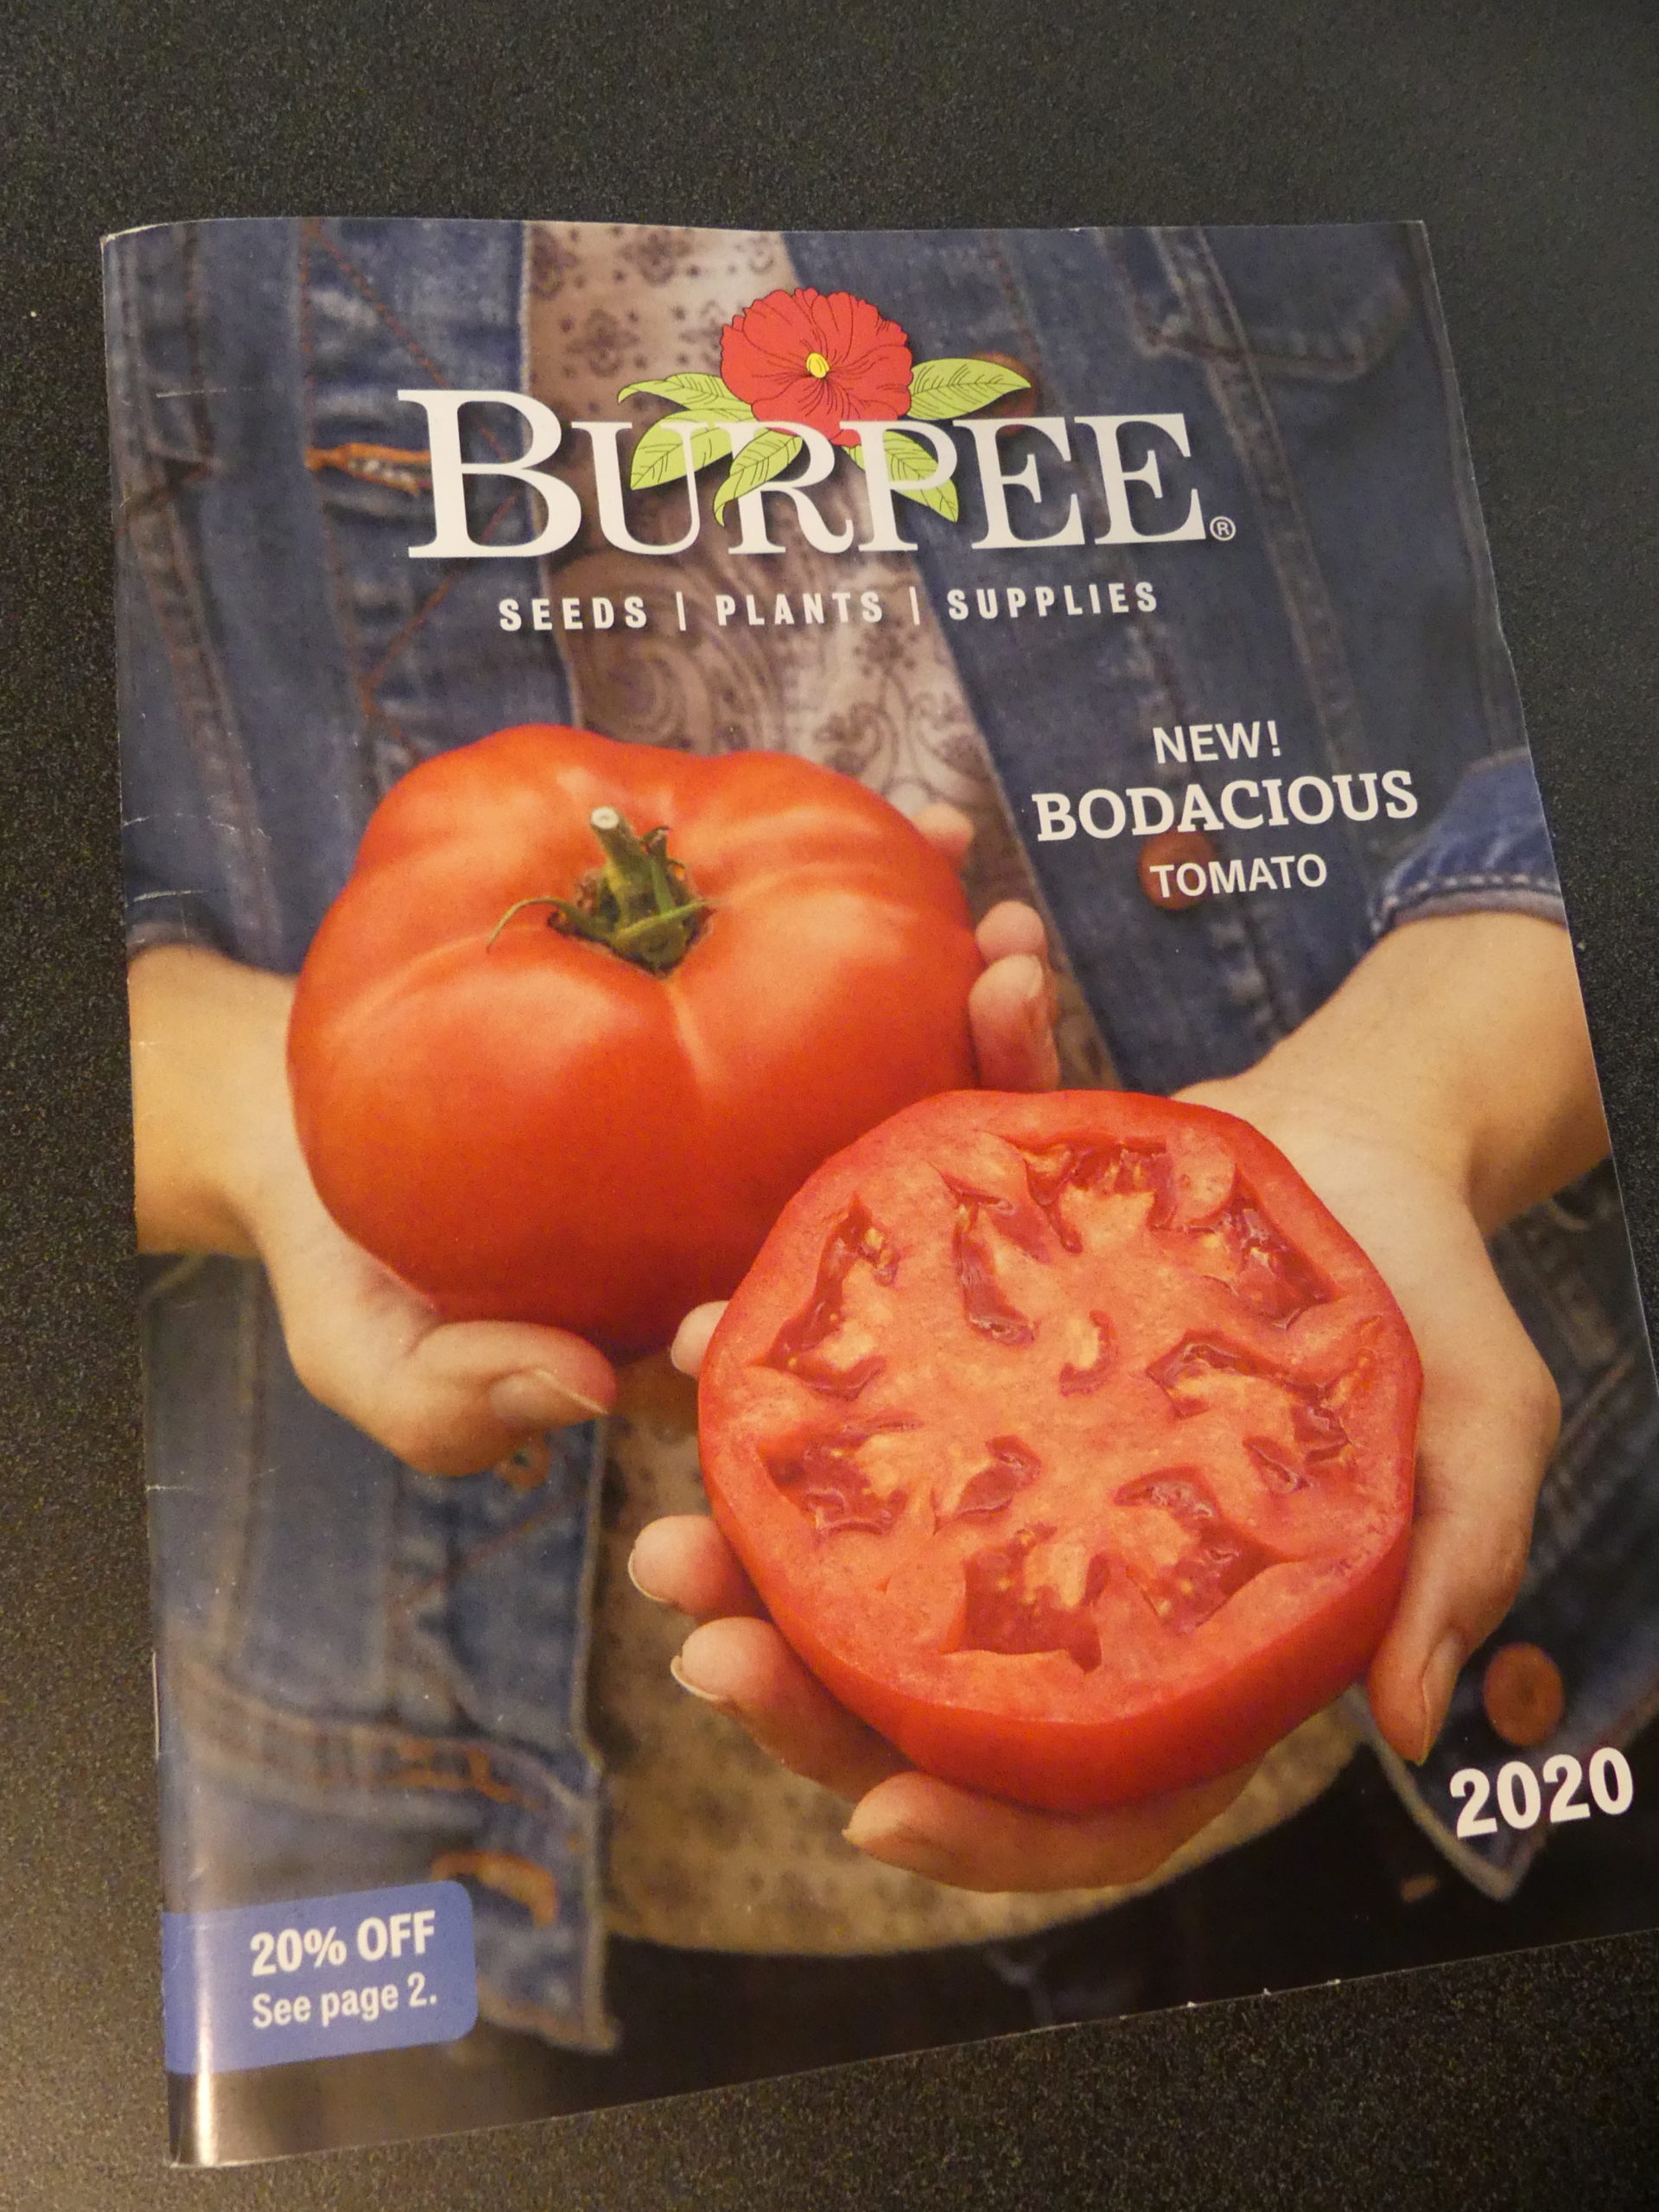 Burpee’s new “Bodacious” tomato offering for 2020. Really? ANDREW MESSINGER